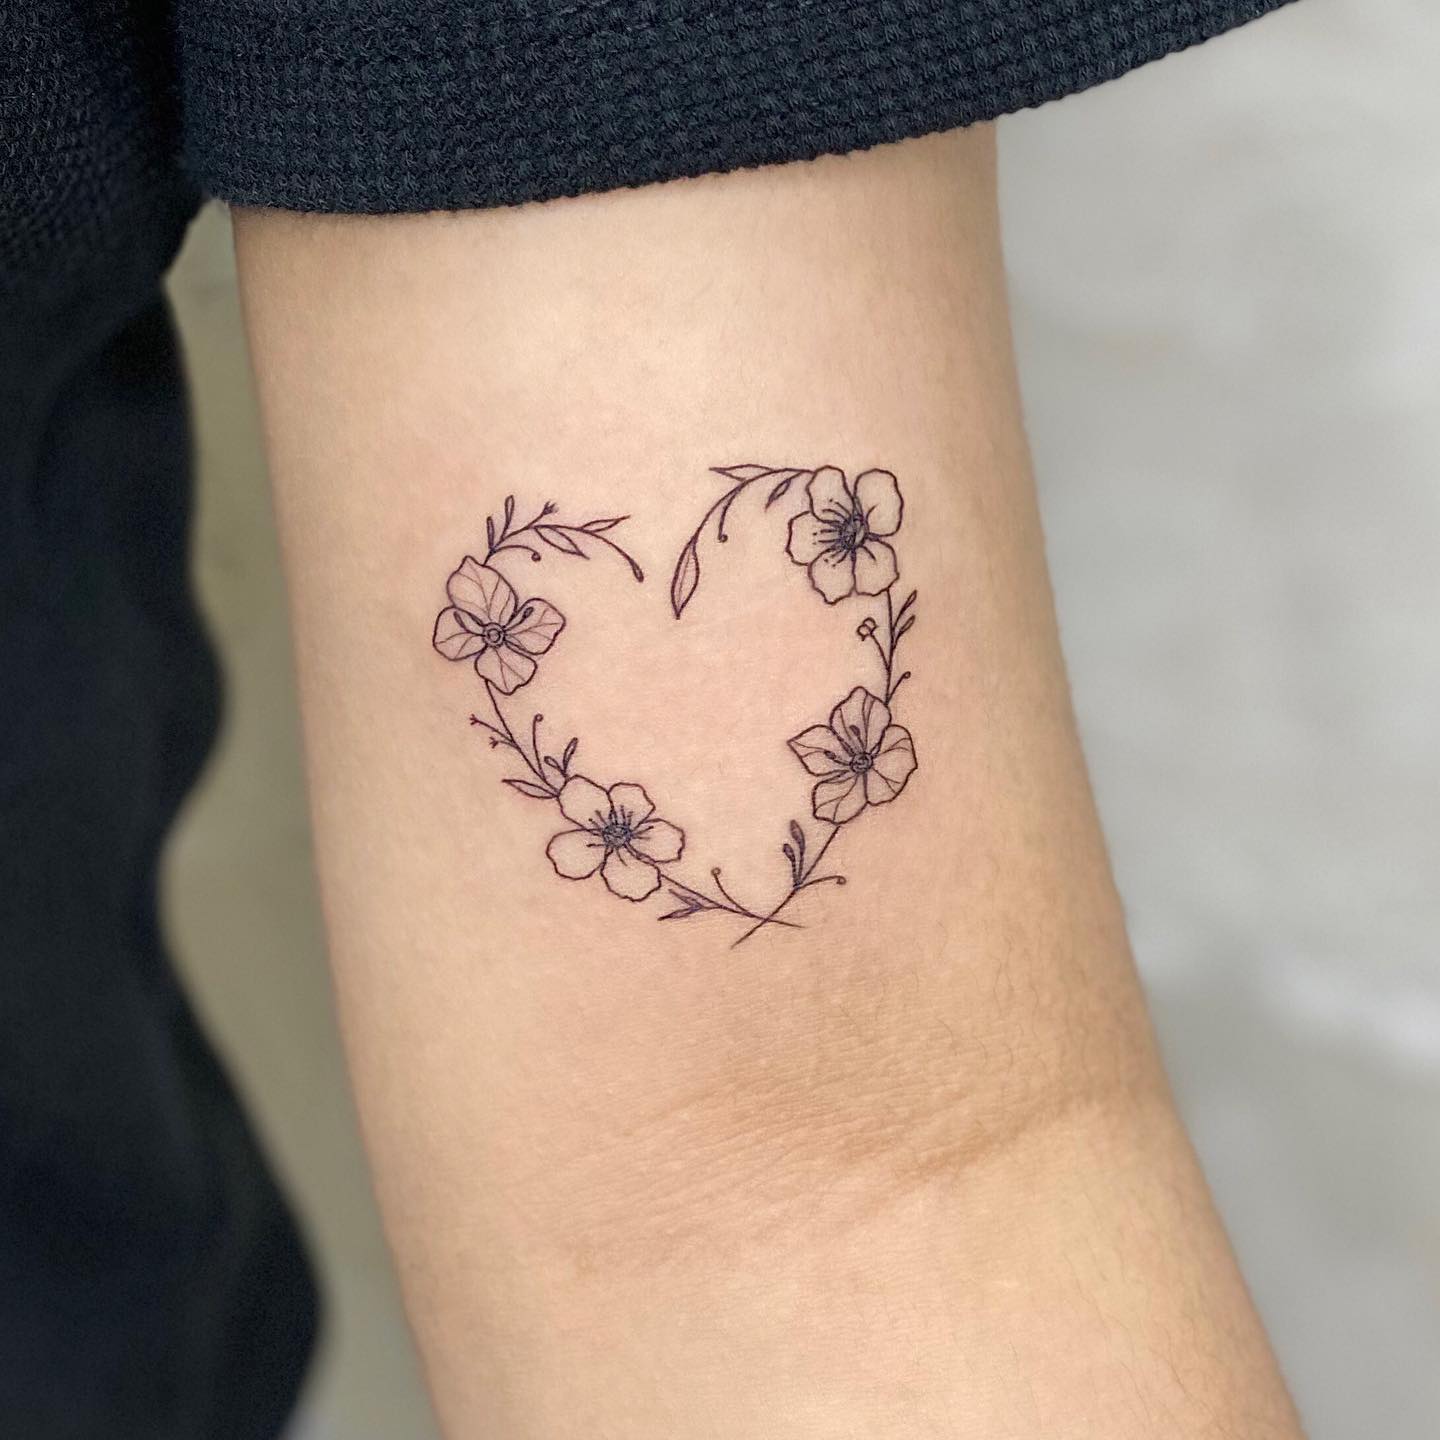 Black and White Flower Heart Tattoo on Arm